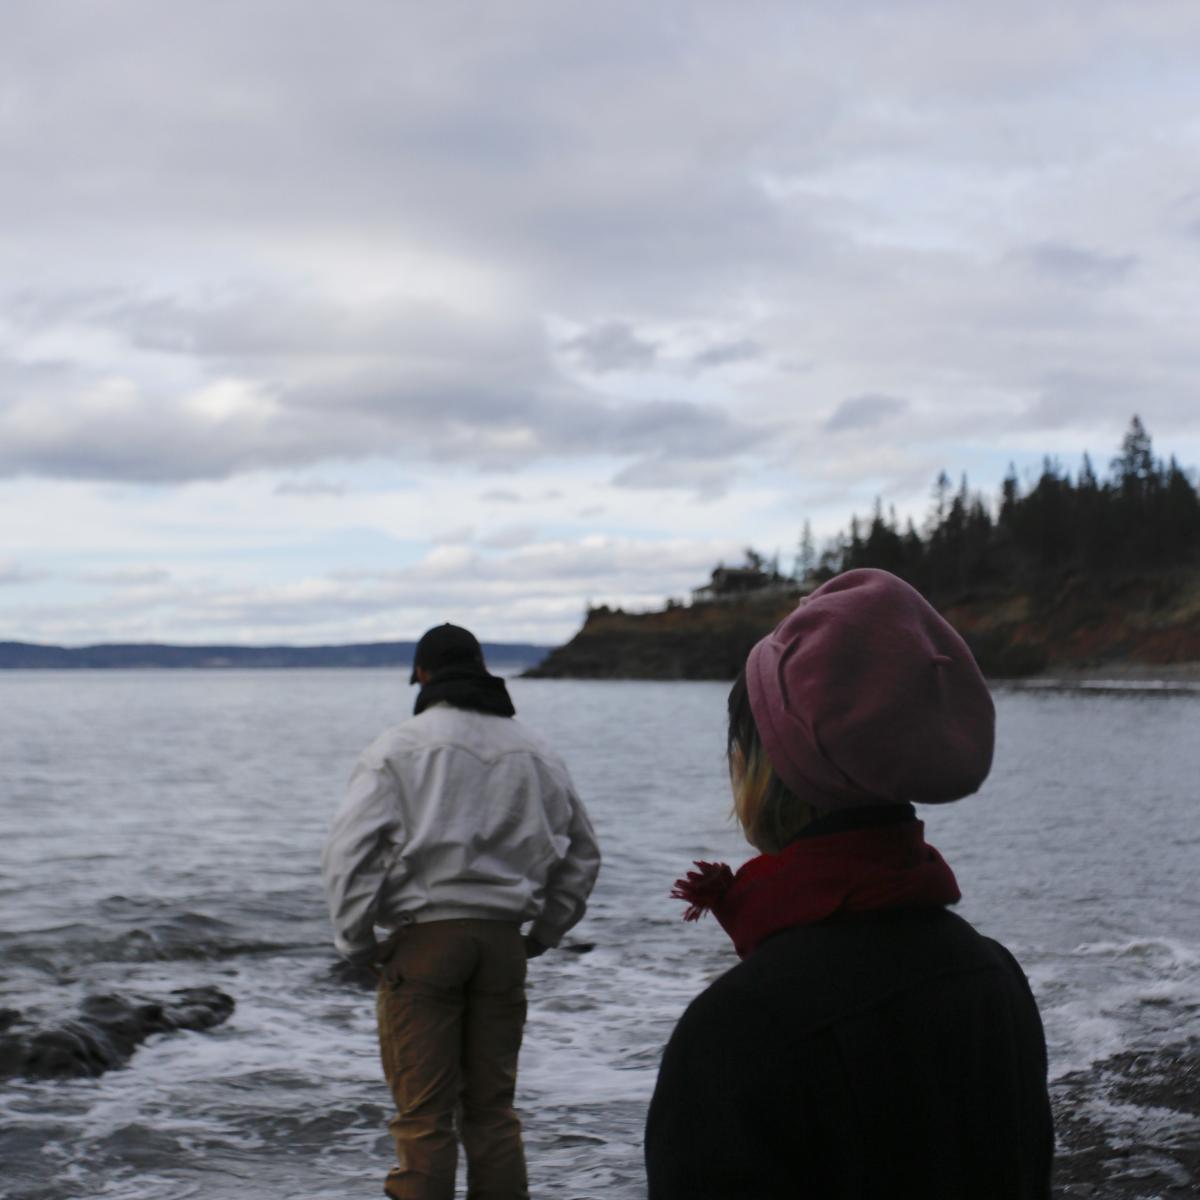 Two people look out on a grey ocean.